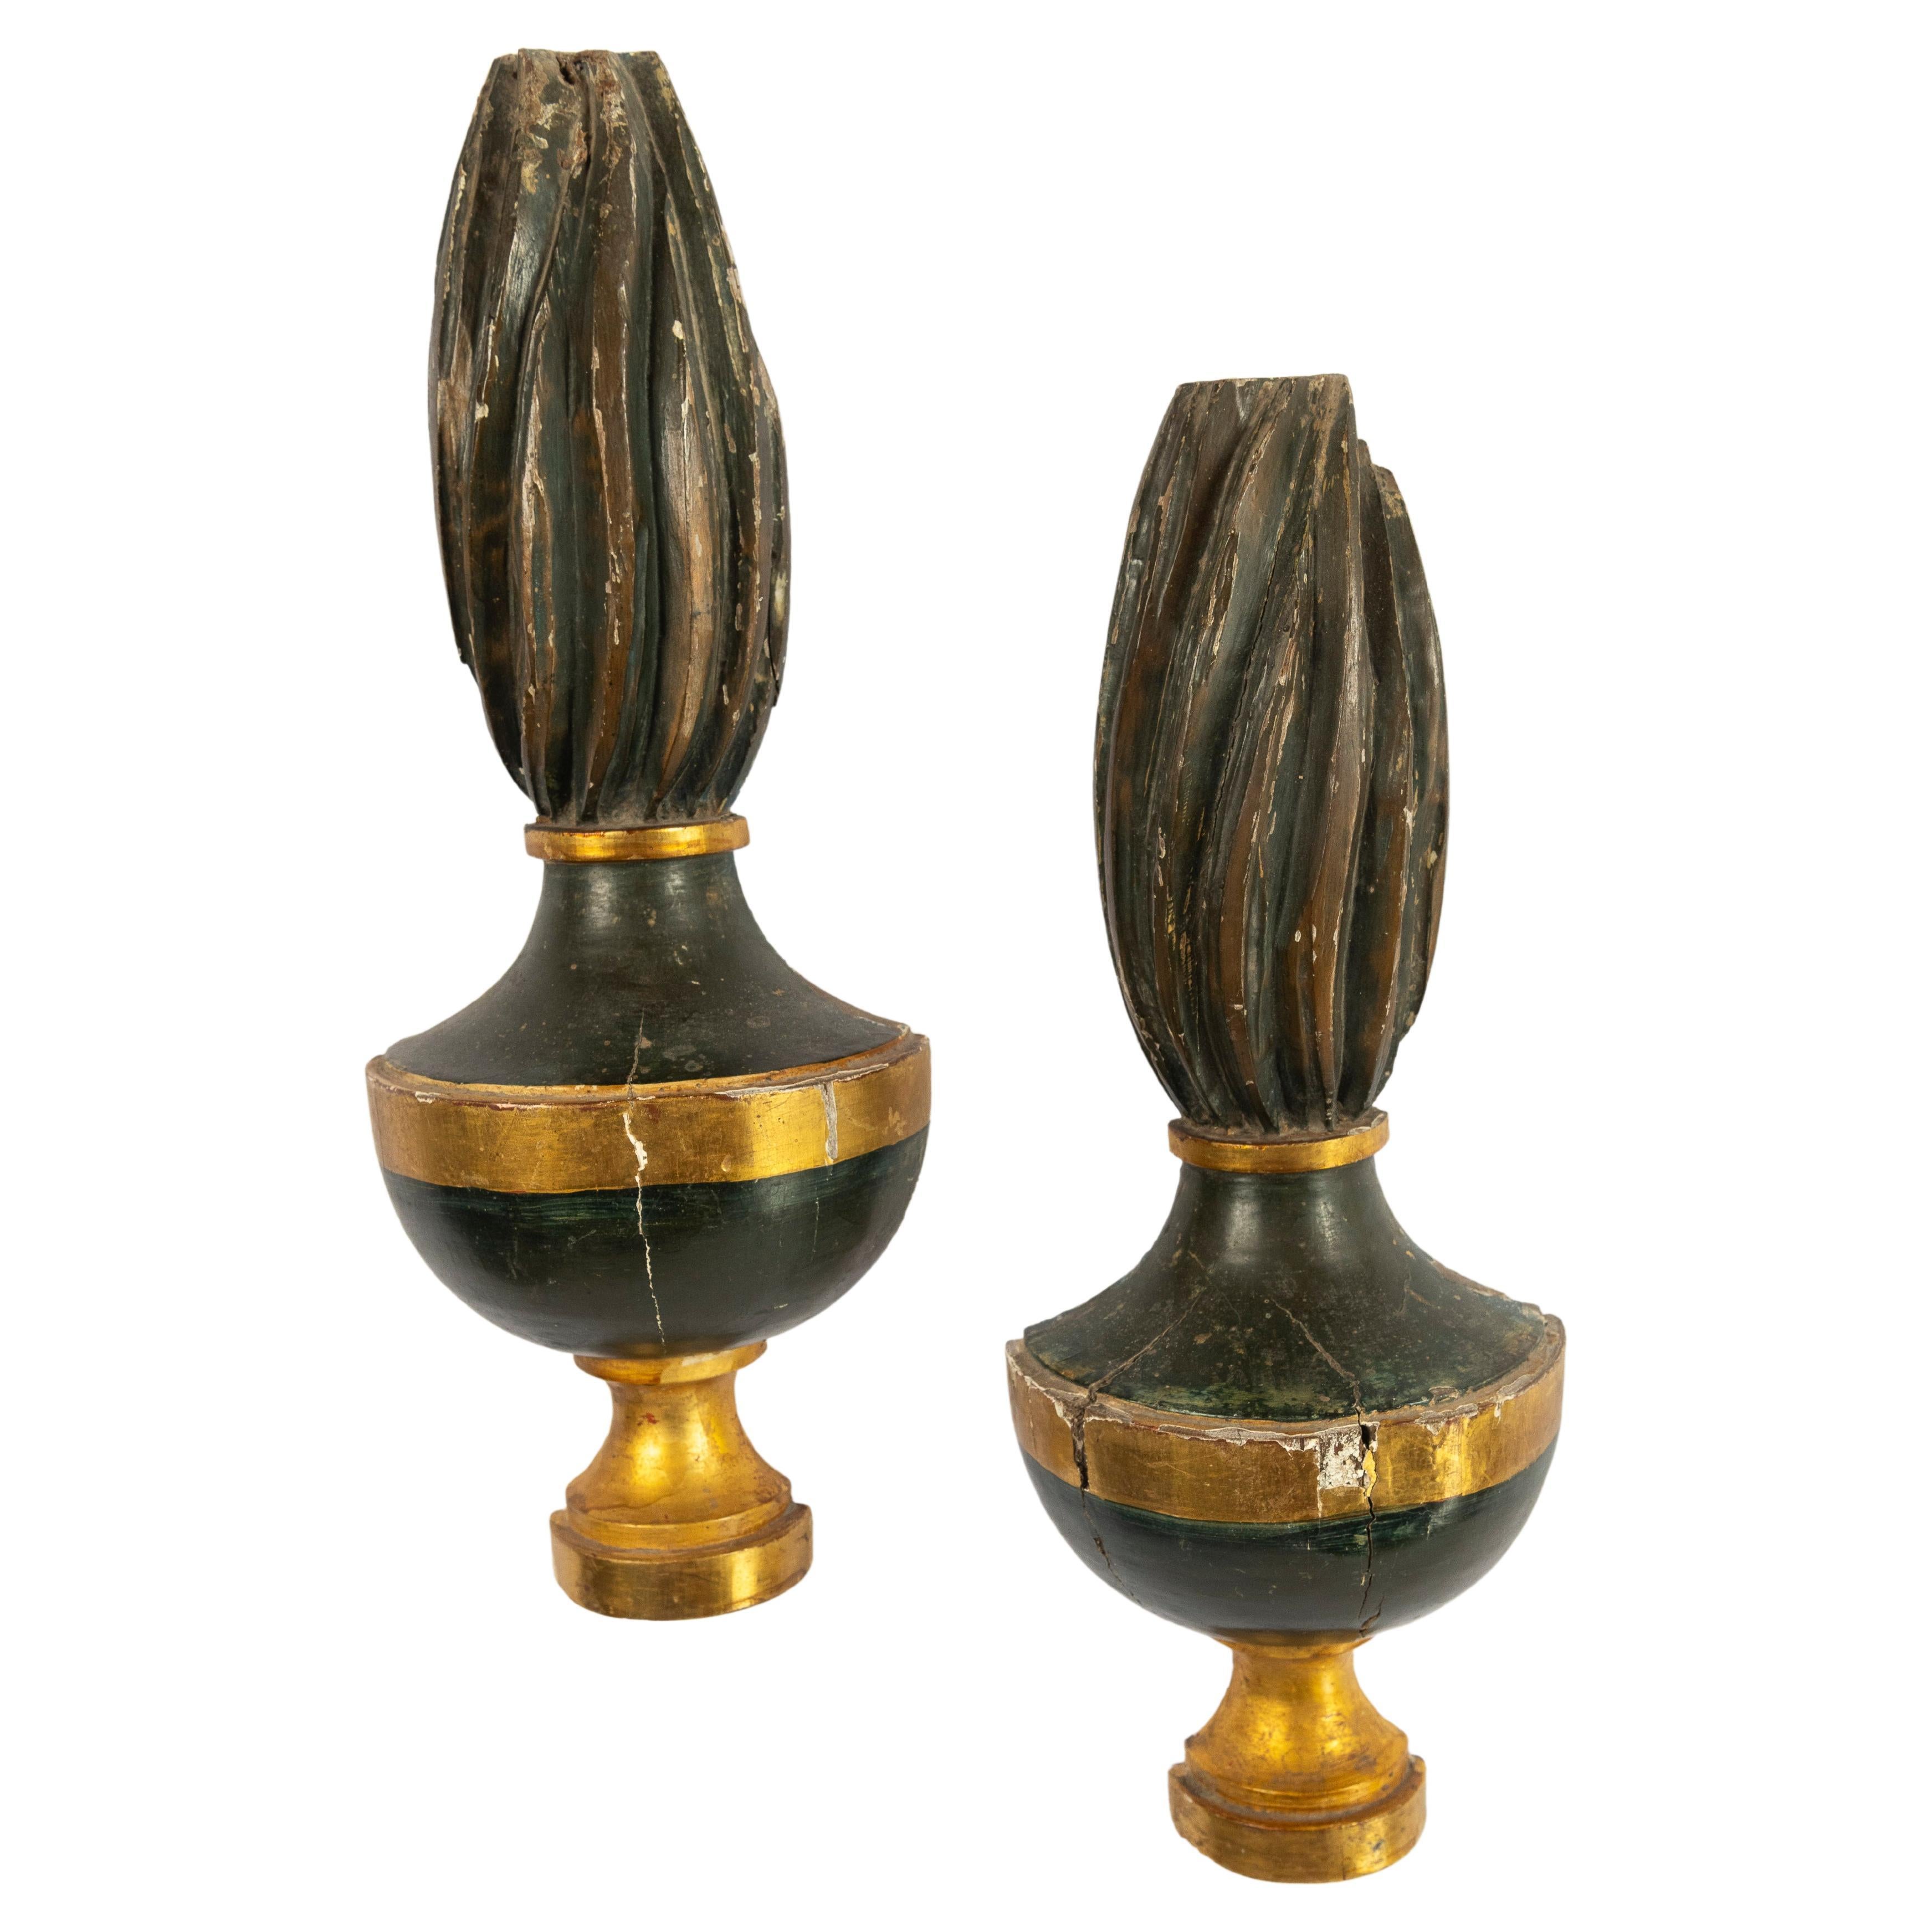 Vintage Carved and Gilded Wooden Flame Wall Ornaments